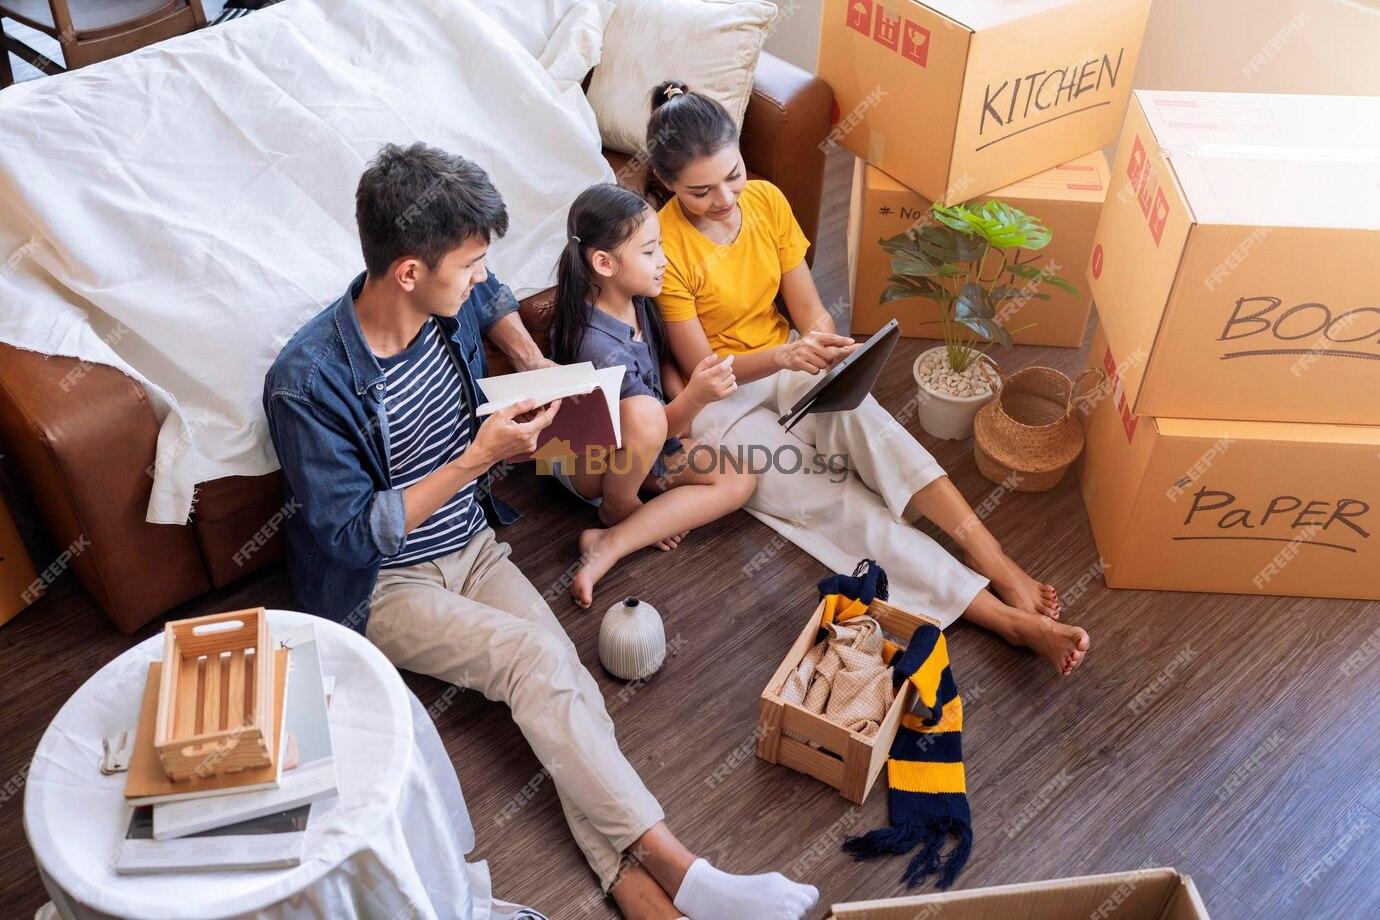 moving home conceptasian family relax leisure time sit together with cardboard box stuffdad mom daughter spending time together after finish packing stuff furniture home apartment moving 6096